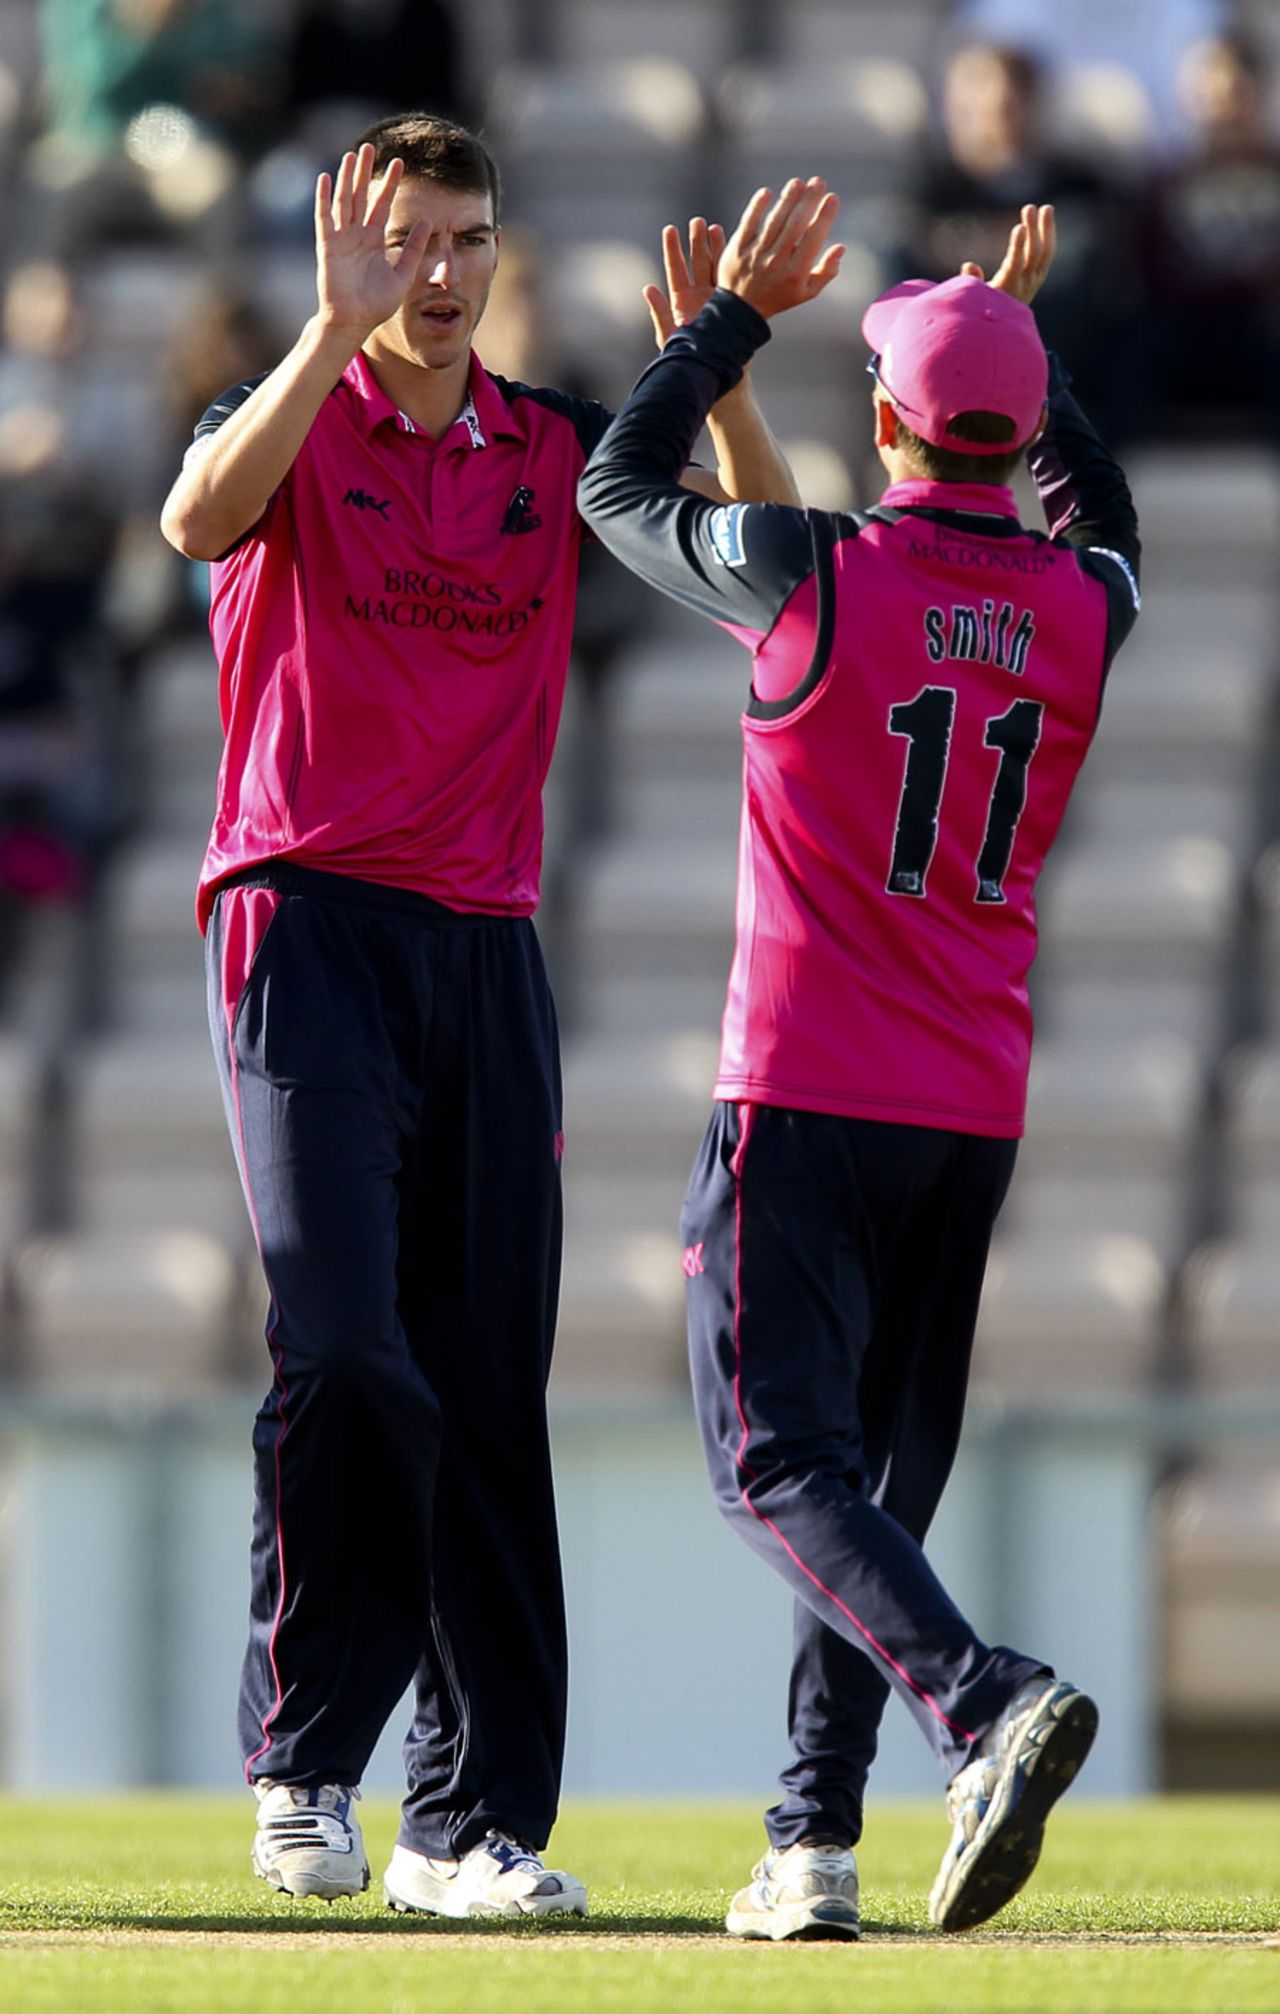 Toby Roland-Jones took four wickets in Middlesex's win, Hampshire v Middlesex, FLt20 South Group, West End, June 18, 2012